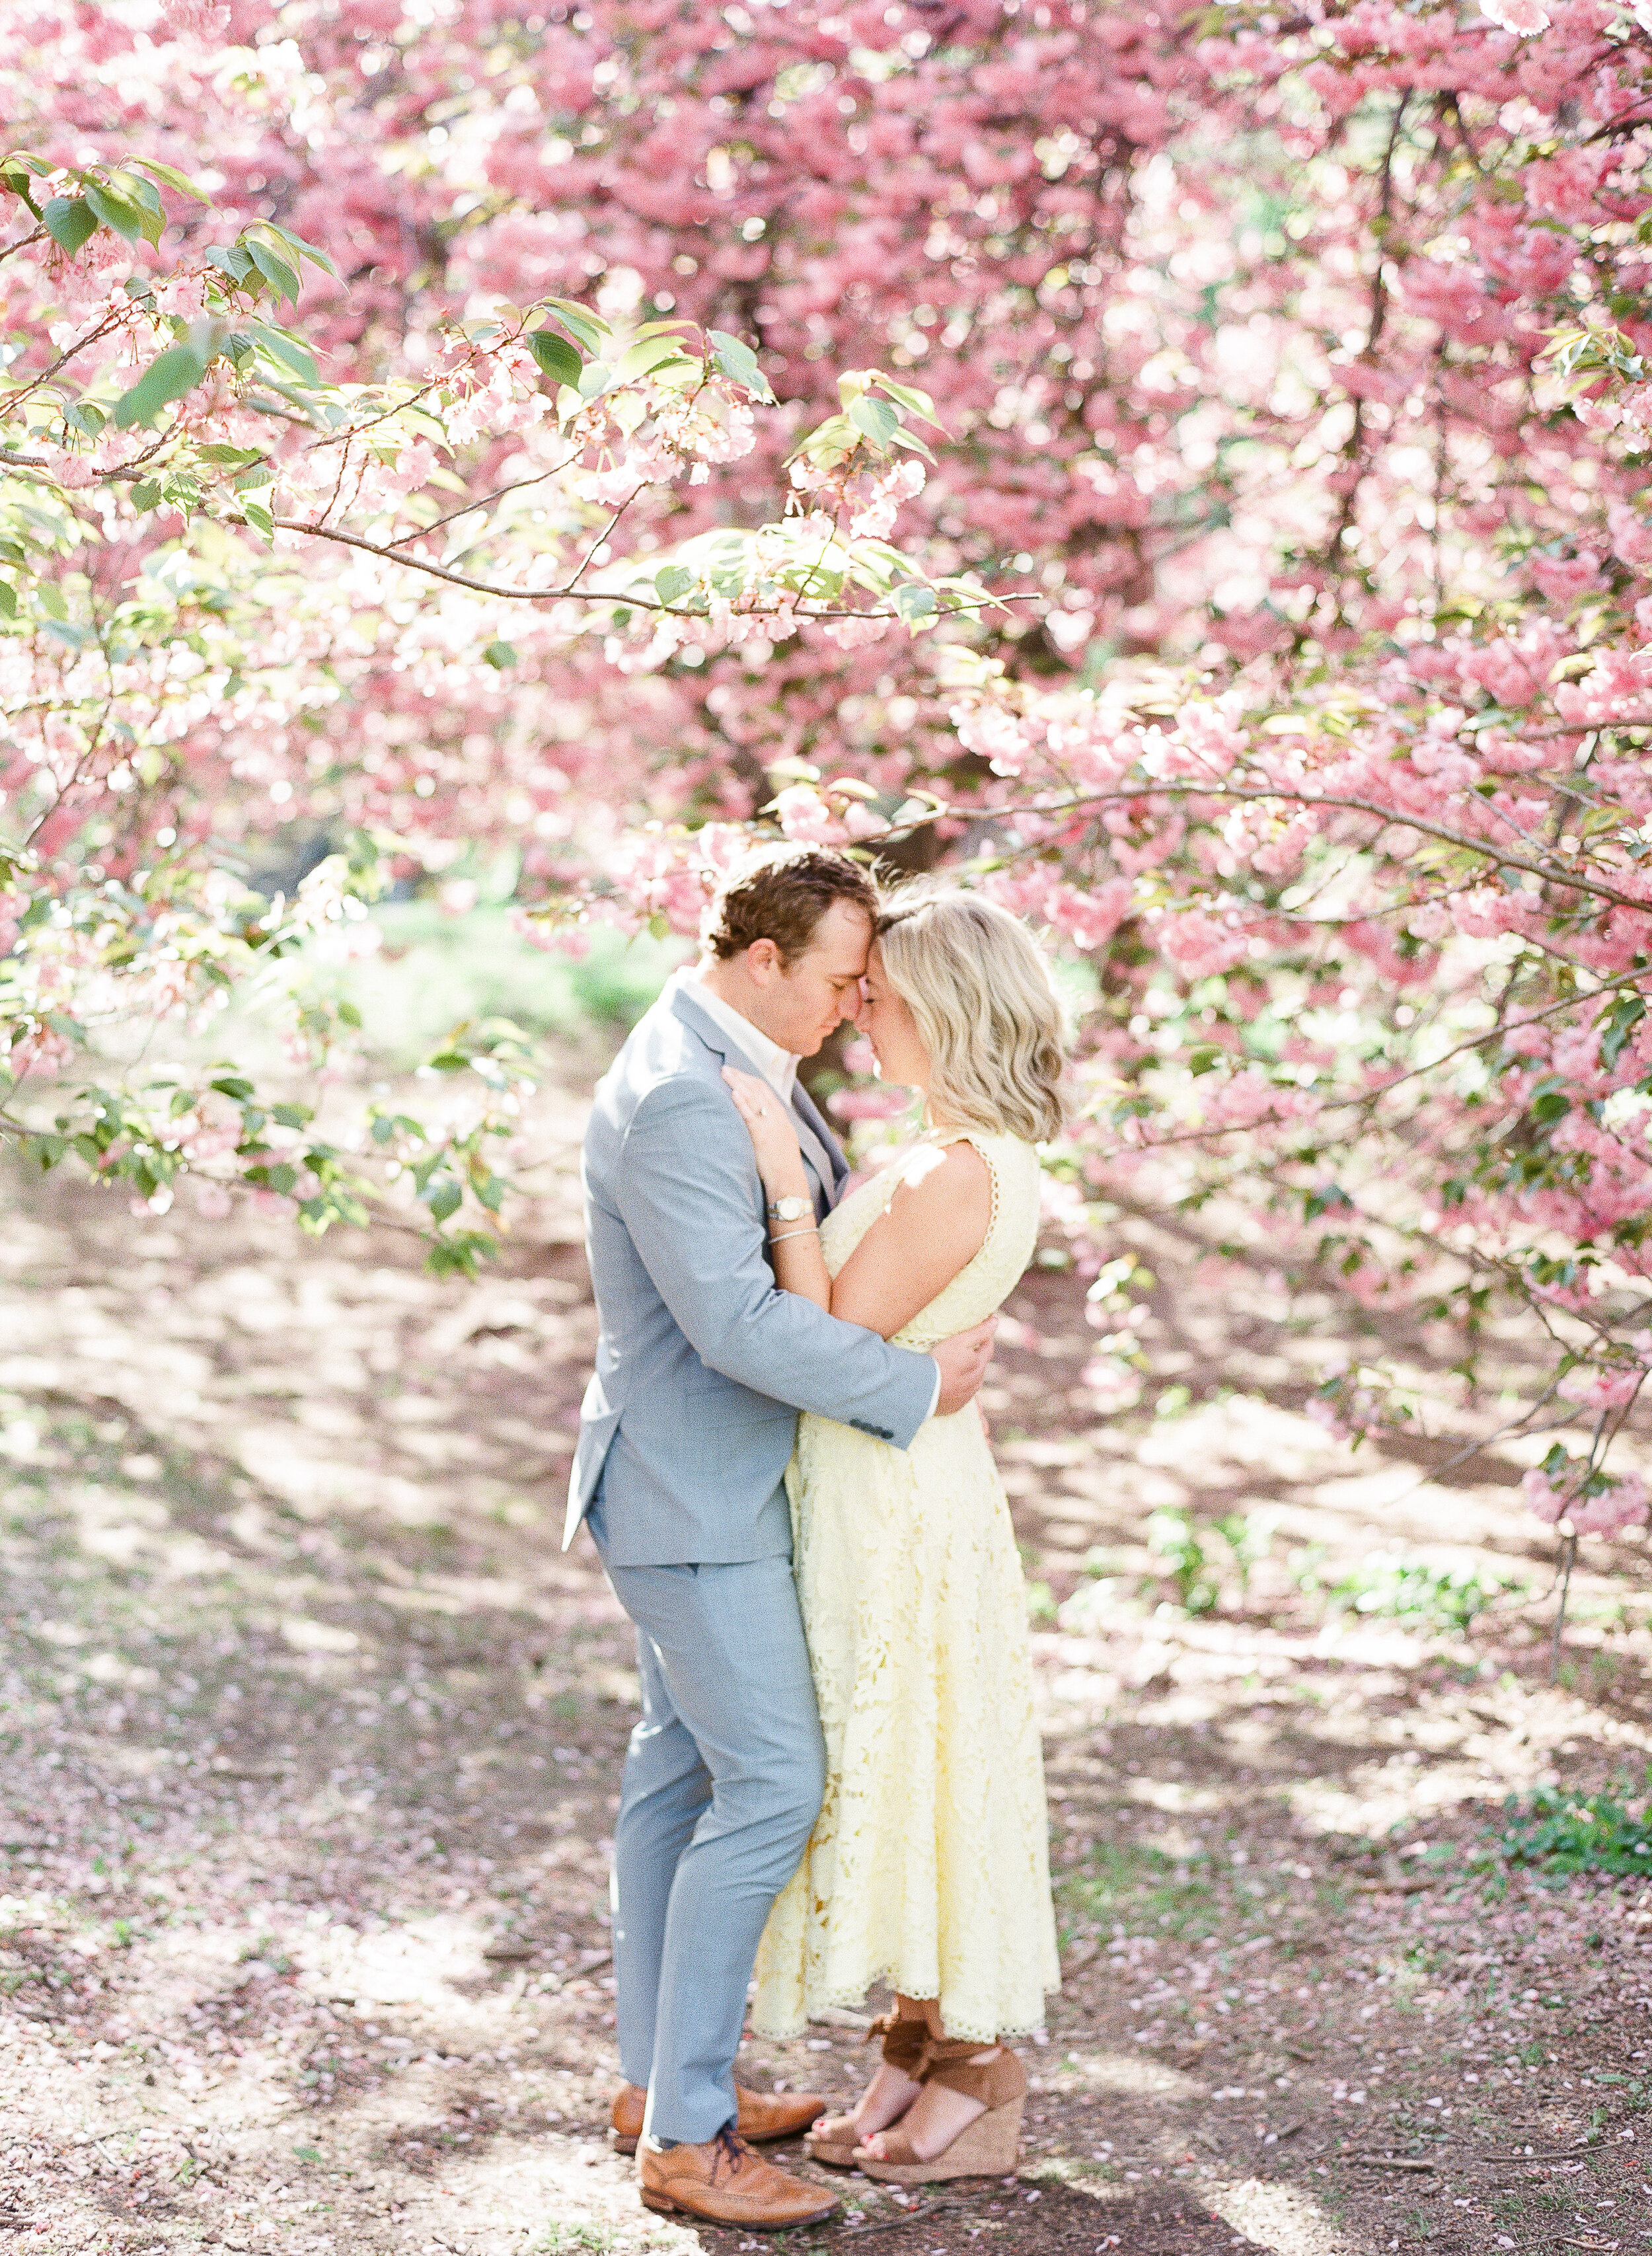 Central Park Engagement Photos in Spring with Cherry Blossoms